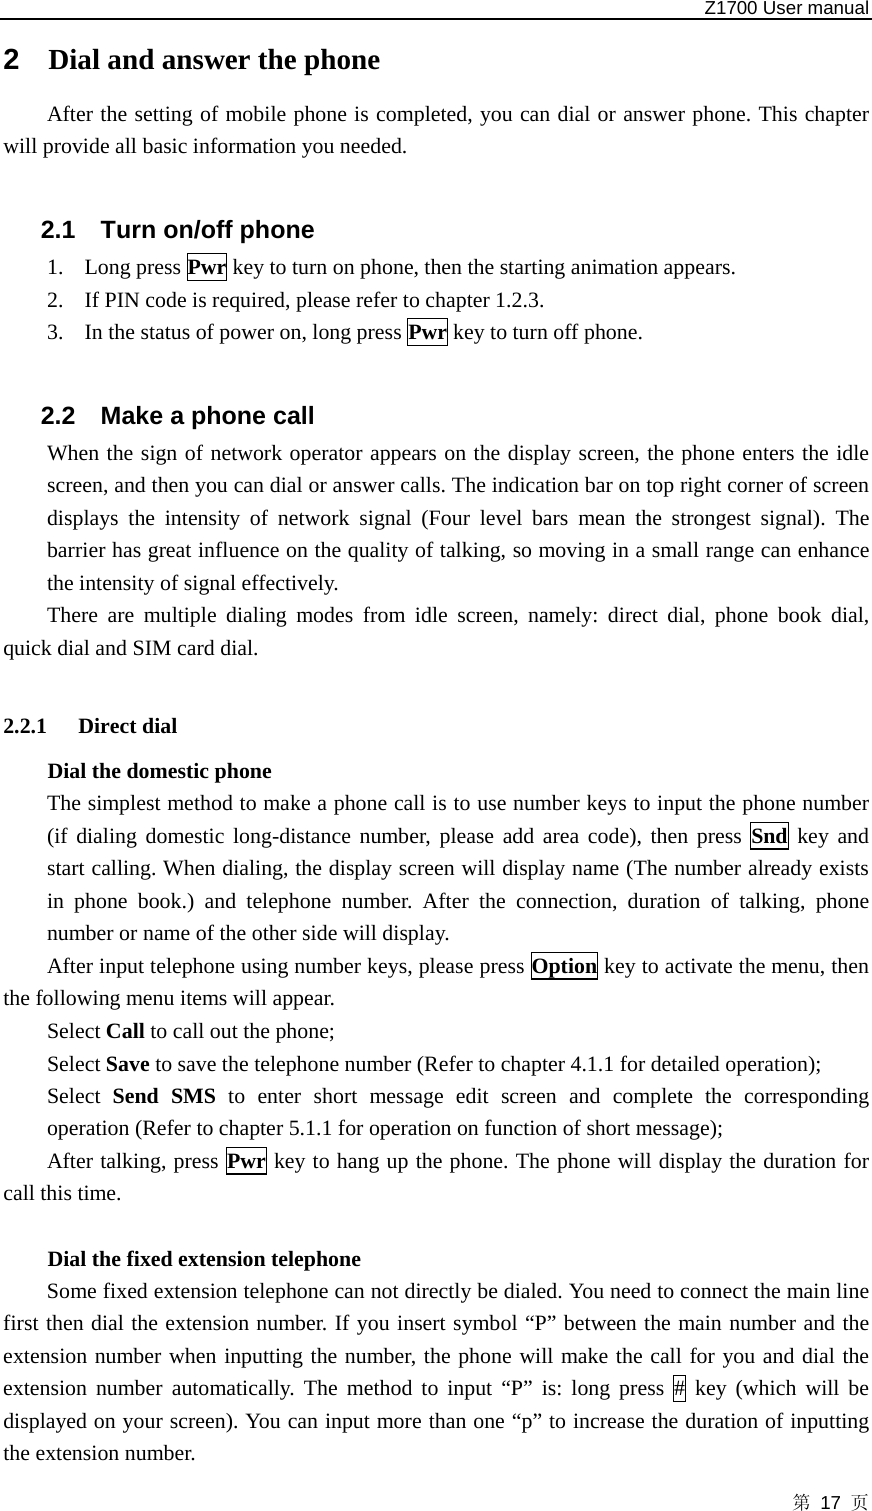   Z1700 User manual 第 17 页 2  Dial and answer the phone After the setting of mobile phone is completed, you can dial or answer phone. This chapter will provide all basic information you needed.  2.1  Turn on/off phone 1. Long press Pwr key to turn on phone, then the starting animation appears. 2. If PIN code is required, please refer to chapter 1.2.3. 3. In the status of power on, long press Pwr key to turn off phone.  2.2  Make a phone call When the sign of network operator appears on the display screen, the phone enters the idle screen, and then you can dial or answer calls. The indication bar on top right corner of screen displays the intensity of network signal (Four level bars mean the strongest signal). The barrier has great influence on the quality of talking, so moving in a small range can enhance the intensity of signal effectively.   There are multiple dialing modes from idle screen, namely: direct dial, phone book dial, quick dial and SIM card dial.  2.2.1 Direct dial Dial the domestic phone   The simplest method to make a phone call is to use number keys to input the phone number (if dialing domestic long-distance number, please add area code), then press Snd key and start calling. When dialing, the display screen will display name (The number already exists in phone book.) and telephone number. After the connection, duration of talking, phone number or name of the other side will display.   After input telephone using number keys, please press Option key to activate the menu, then the following menu items will appear. Select Call to call out the phone;   Select Save to save the telephone number (Refer to chapter 4.1.1 for detailed operation);   Select  Send SMS to enter short message edit screen and complete the corresponding operation (Refer to chapter 5.1.1 for operation on function of short message);   After talking, press Pwr key to hang up the phone. The phone will display the duration for call this time.  Dial the fixed extension telephone   Some fixed extension telephone can not directly be dialed. You need to connect the main line first then dial the extension number. If you insert symbol “P” between the main number and the extension number when inputting the number, the phone will make the call for you and dial the extension number automatically. The method to input “P” is: long press # key (which will be displayed on your screen). You can input more than one “p” to increase the duration of inputting the extension number. 